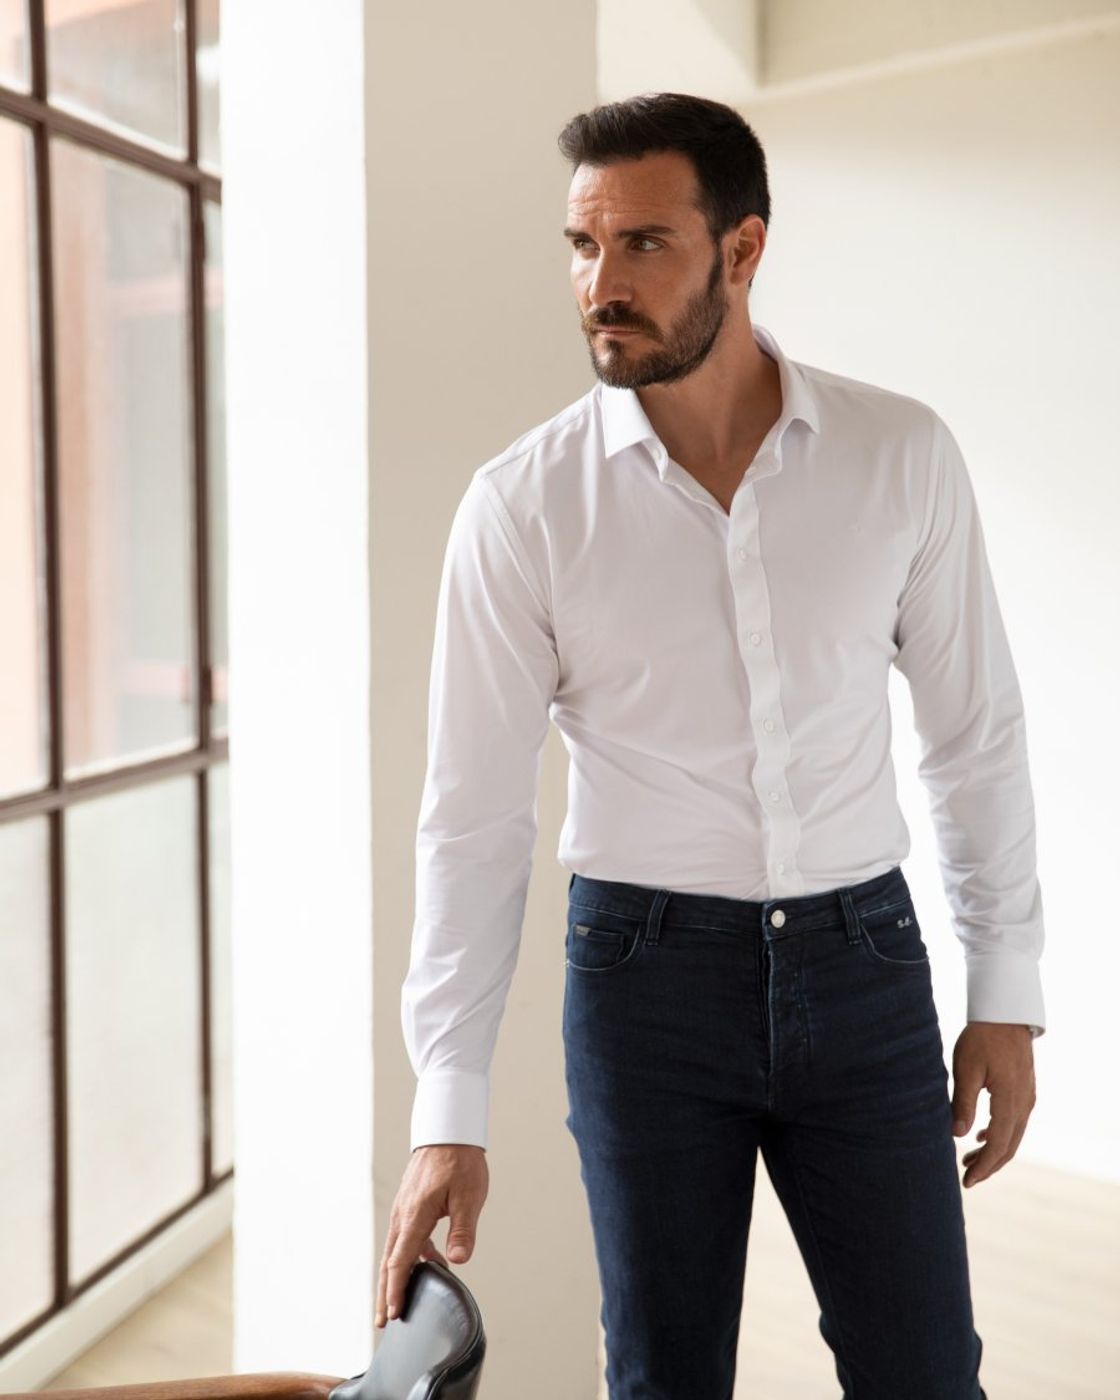 Man dressed in white button down shirt